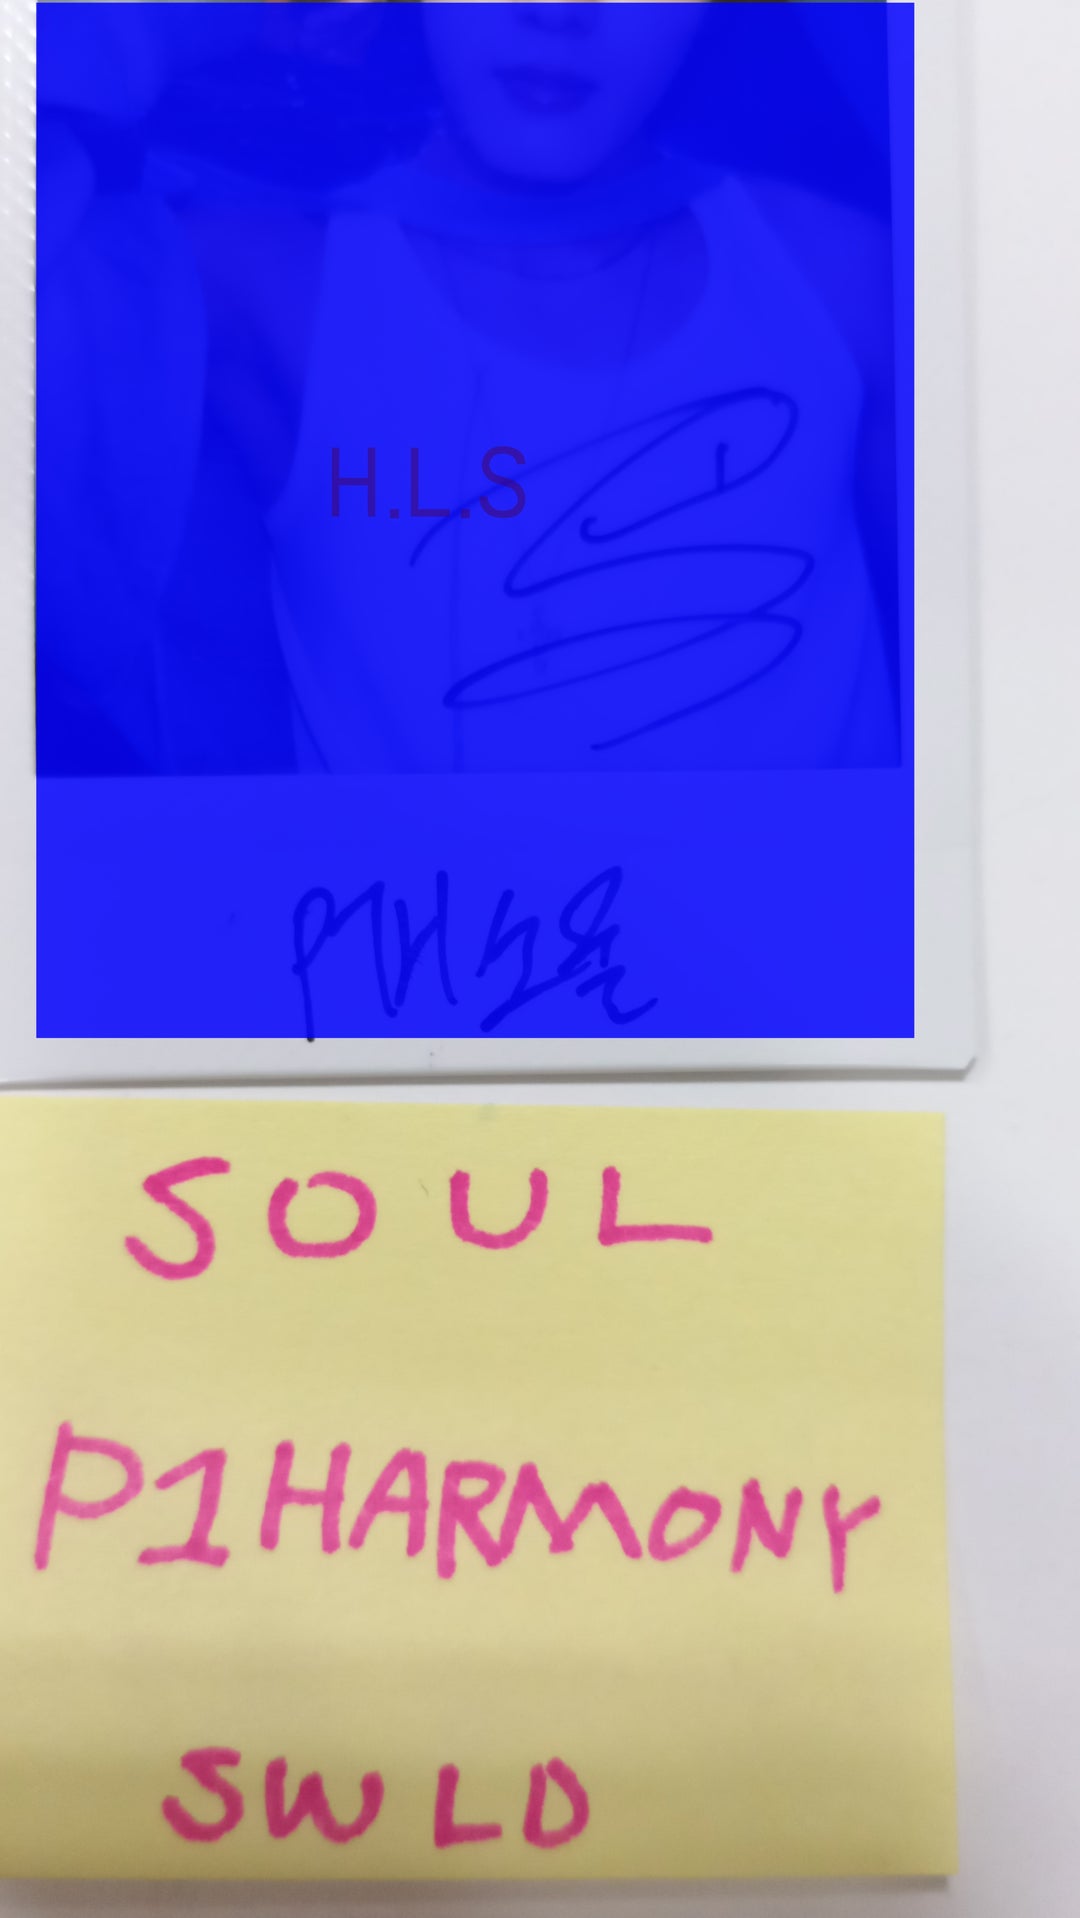 SOUL (Of P1Harmony) 'HARMONY : ALL IN' - Hand Autographed(Signed) Polaroid [23.09.20]